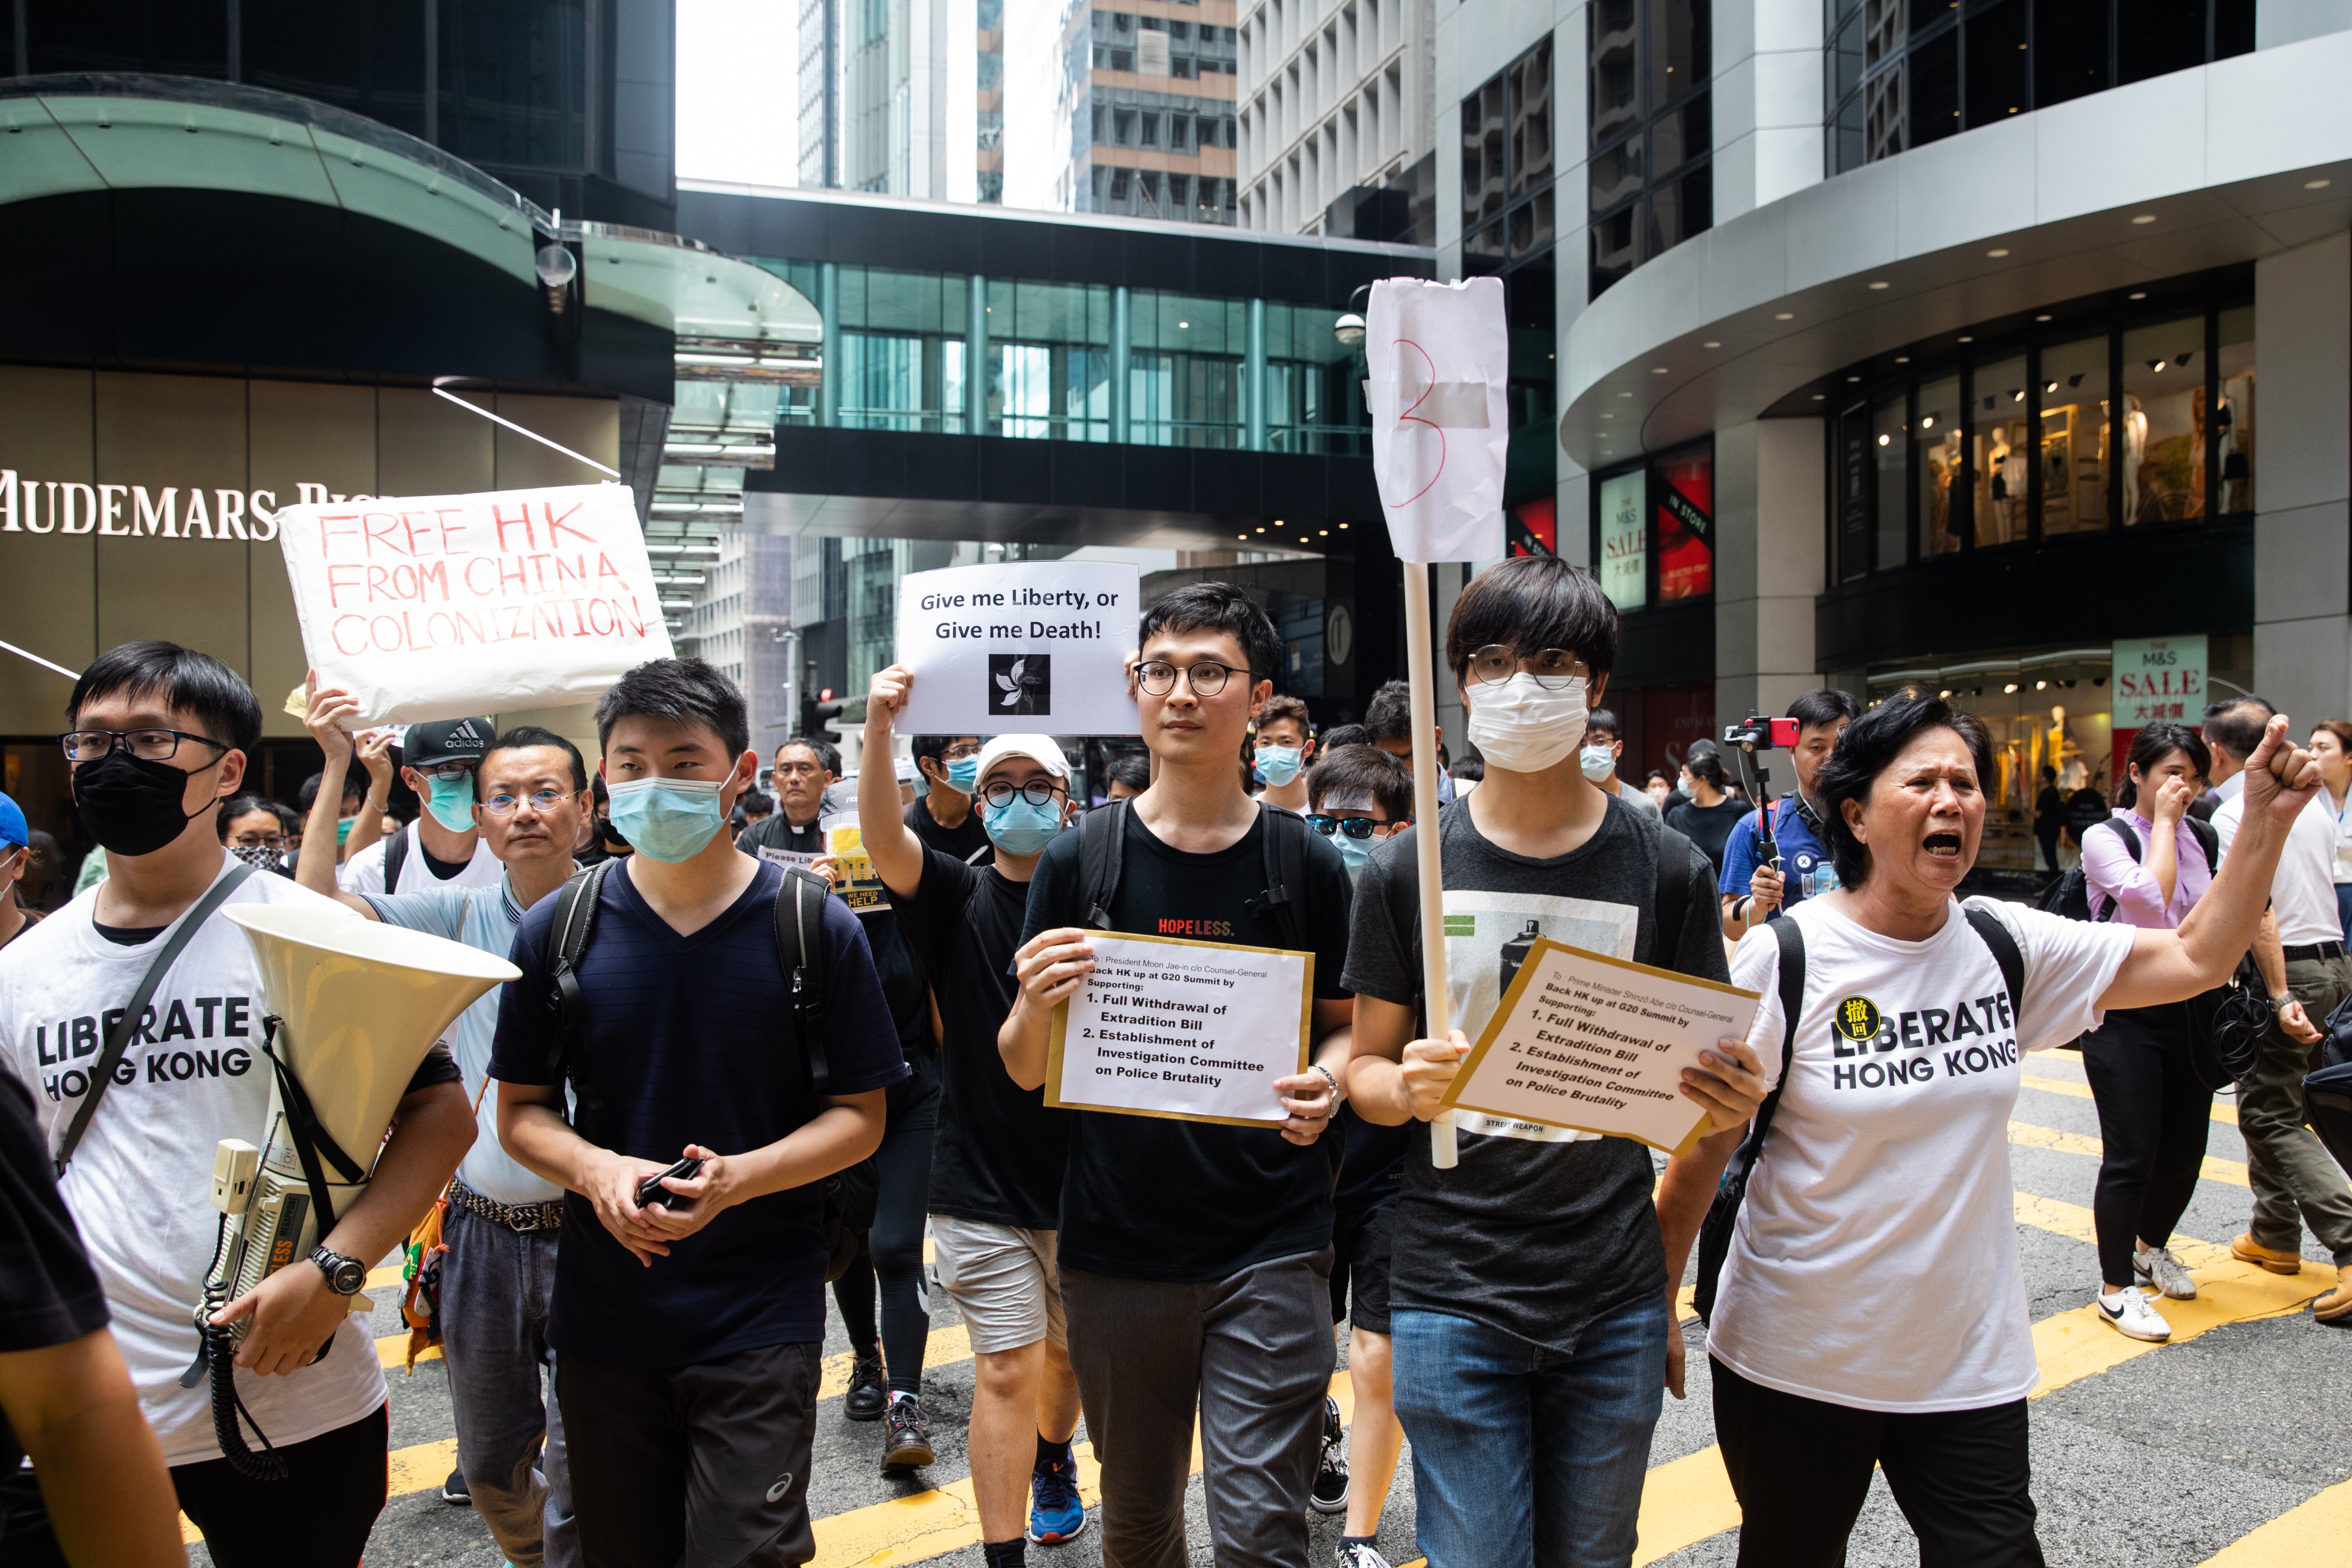 Ventus Lau (C) leads a march to deliver letters to local G-20 consulates urging global intervention against a proposed extradition bill in Hong Kong, China, on Wednesday, June 26, 2019. (Kyle Lam/Bloomberg via Getty Images)